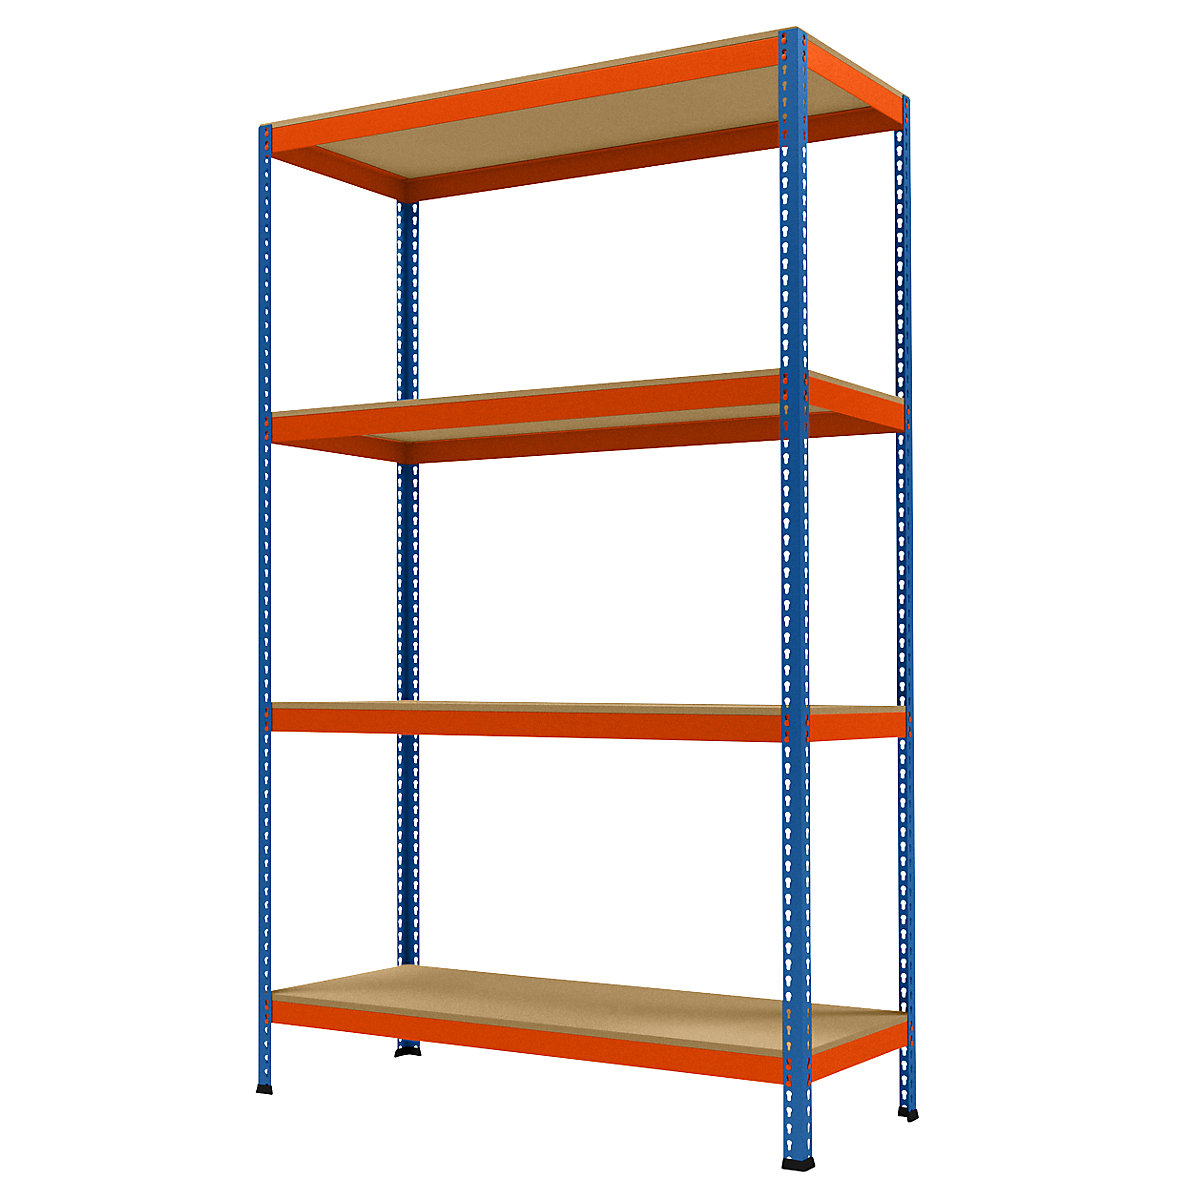 Wide span heavy duty shelving, height 2438 mm, overall depth 621 mm, width 1536 mm